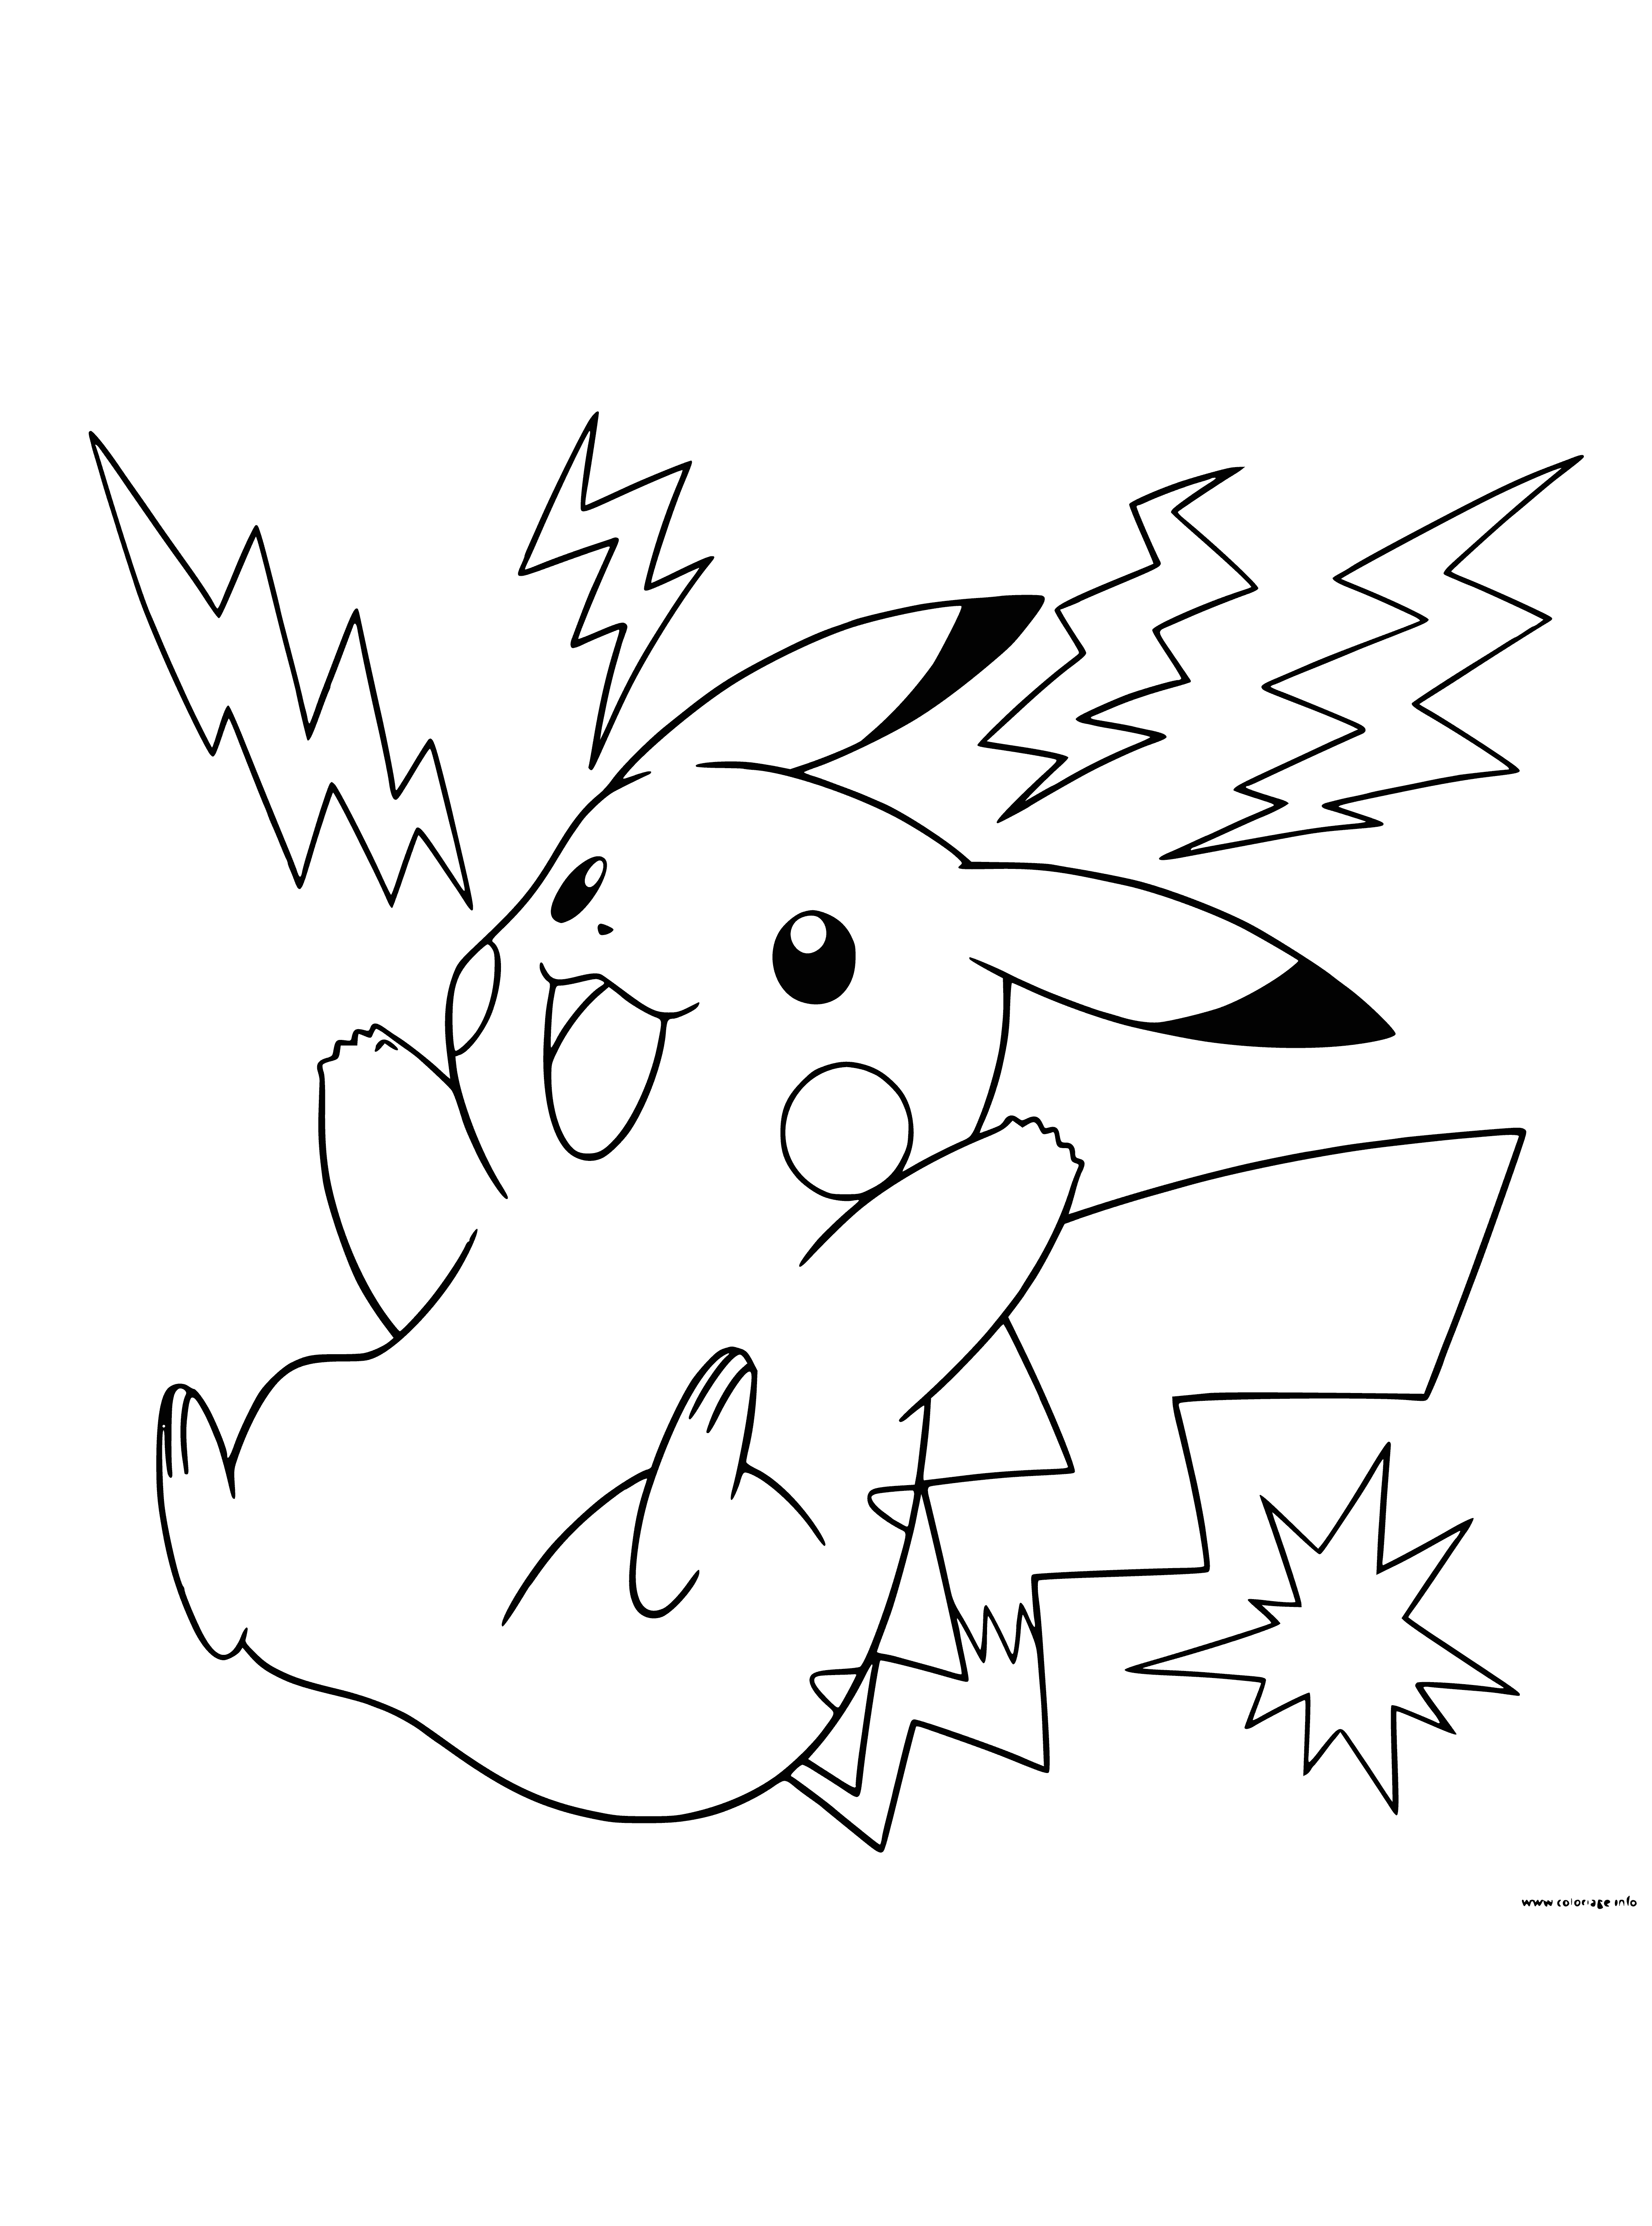 coloring page: Pikachu is a friendly, yellow Pokemon with rounded ears, a lightning bolt tail, black stripes and red cheeks.